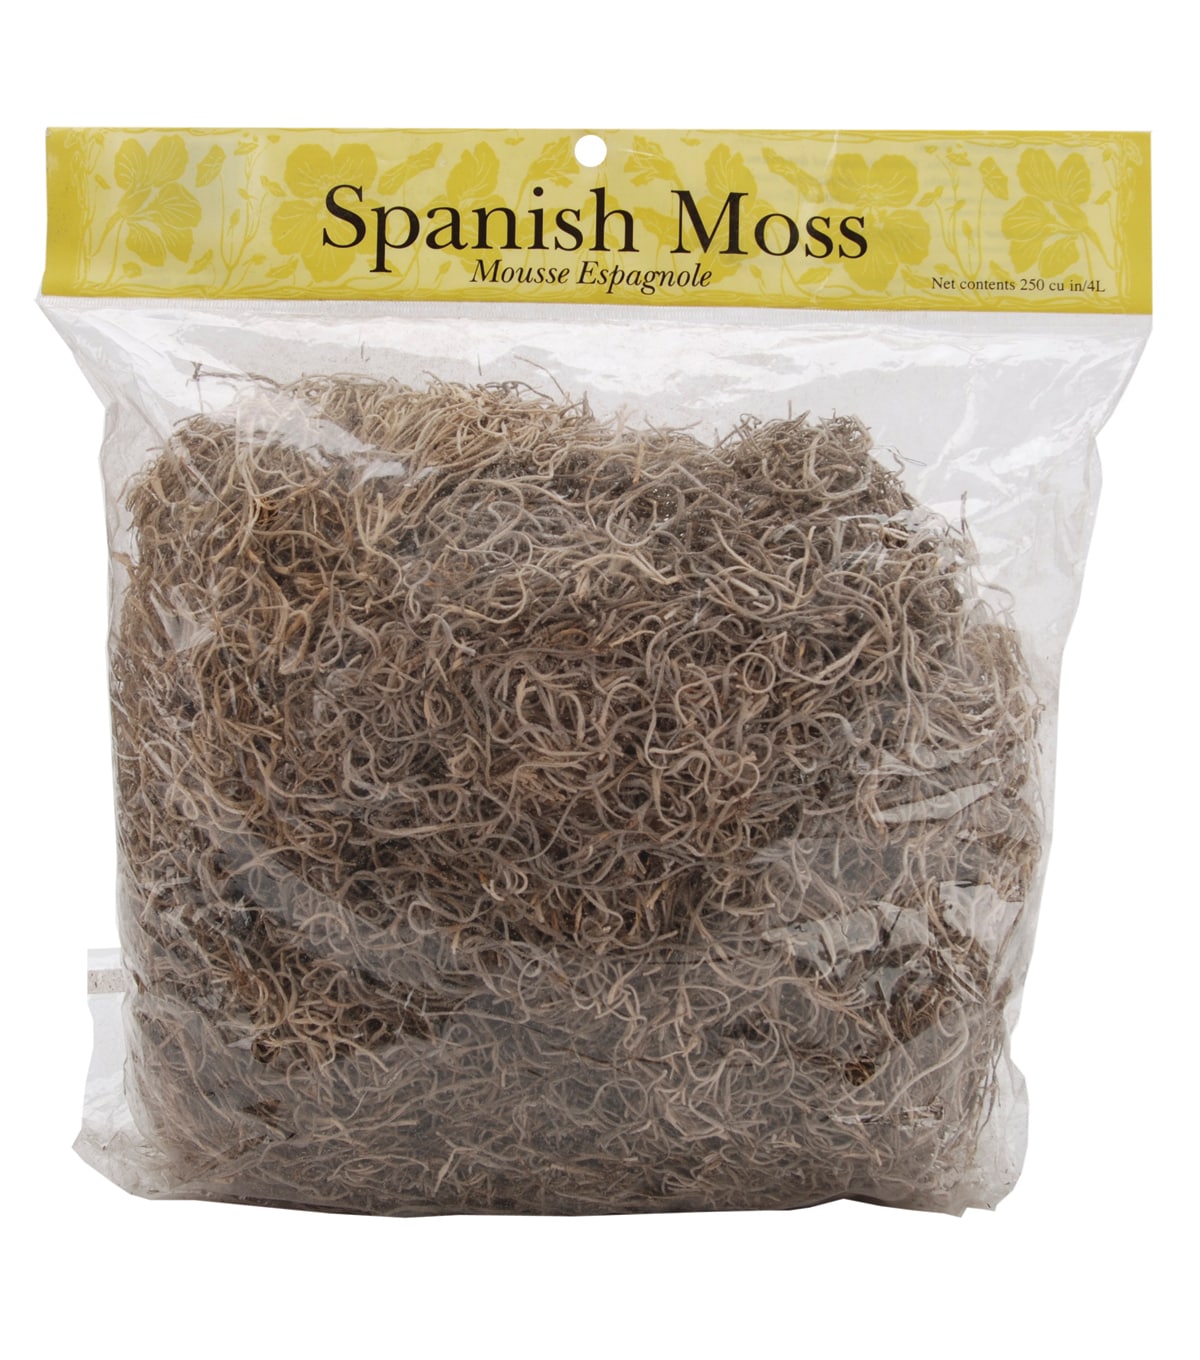 How to Prepare Spanish Moss for Indoor Use